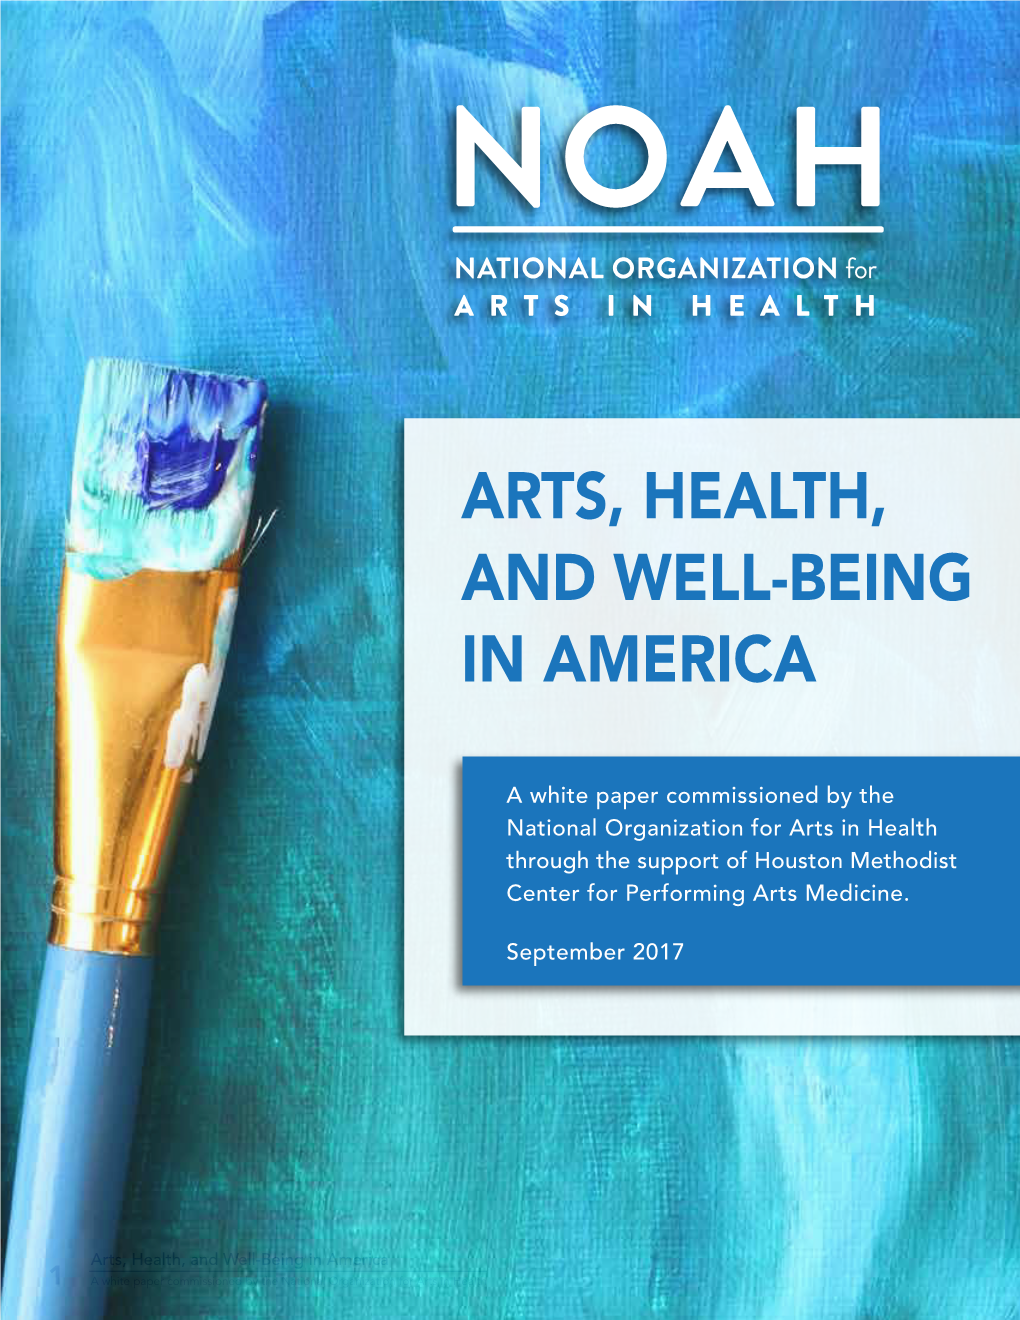 Arts, Health, and Well-Being in America